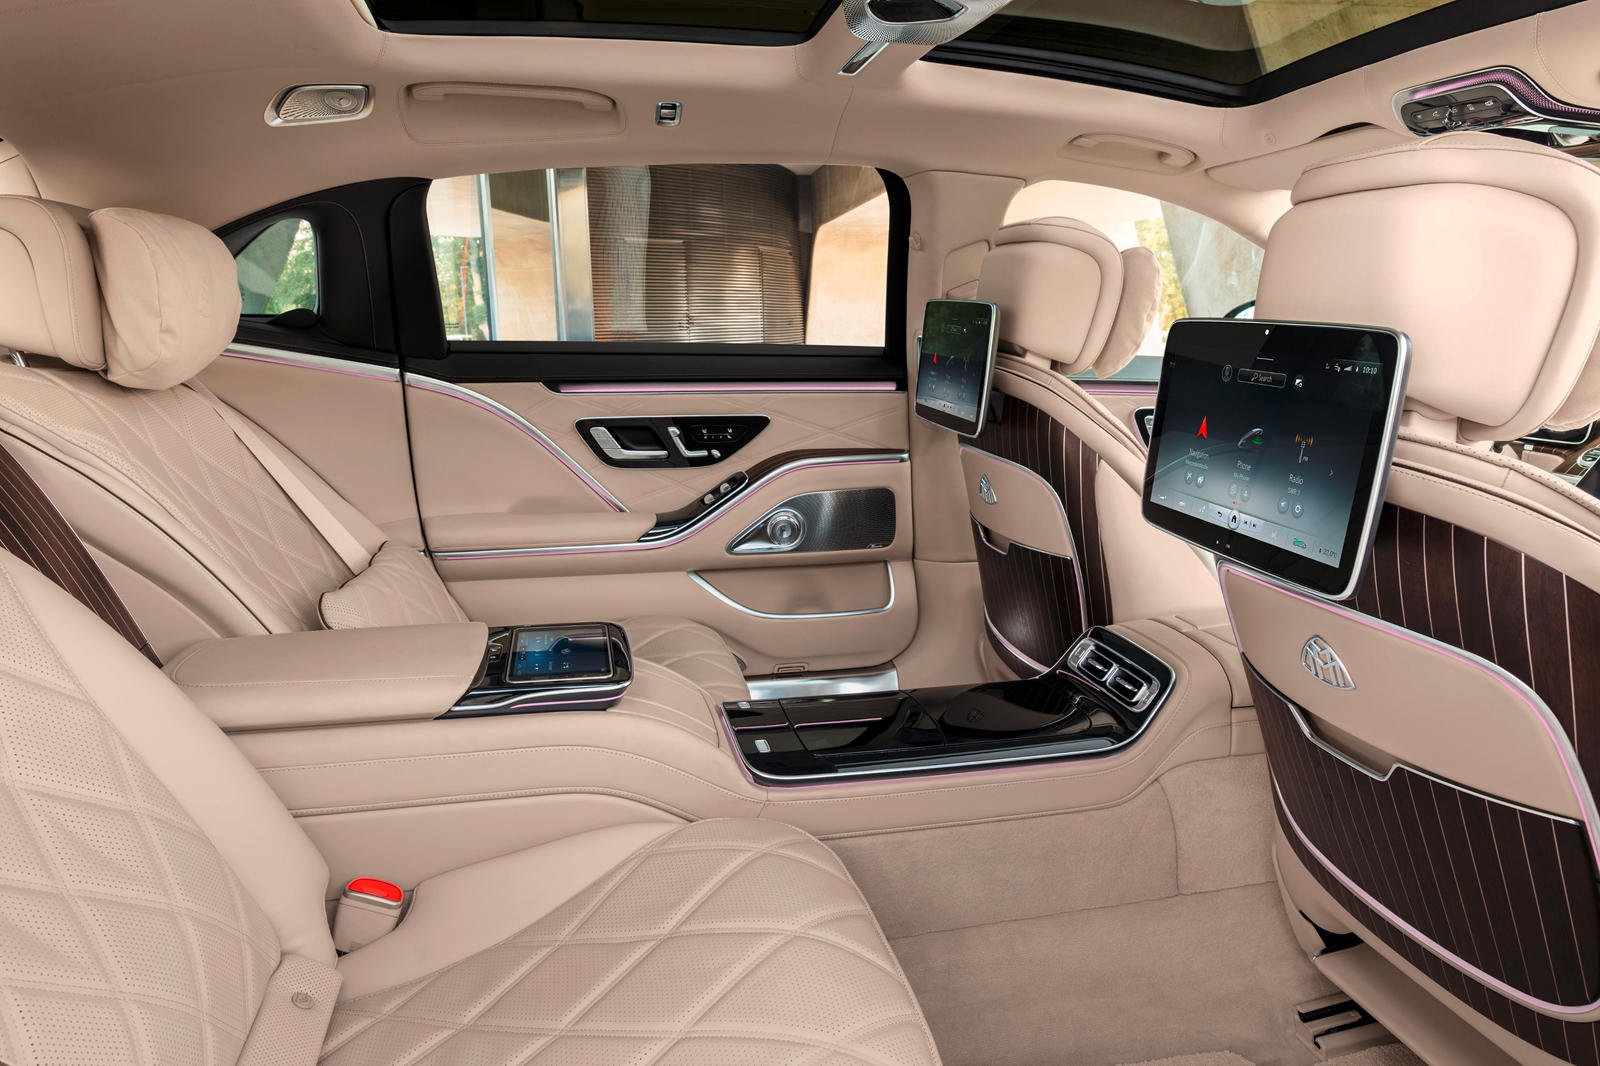 2022 Mercedes-Maybach S Interior Dimensions: Seating, Cargo Space & Trunk  Size - Photos | CarBuzz